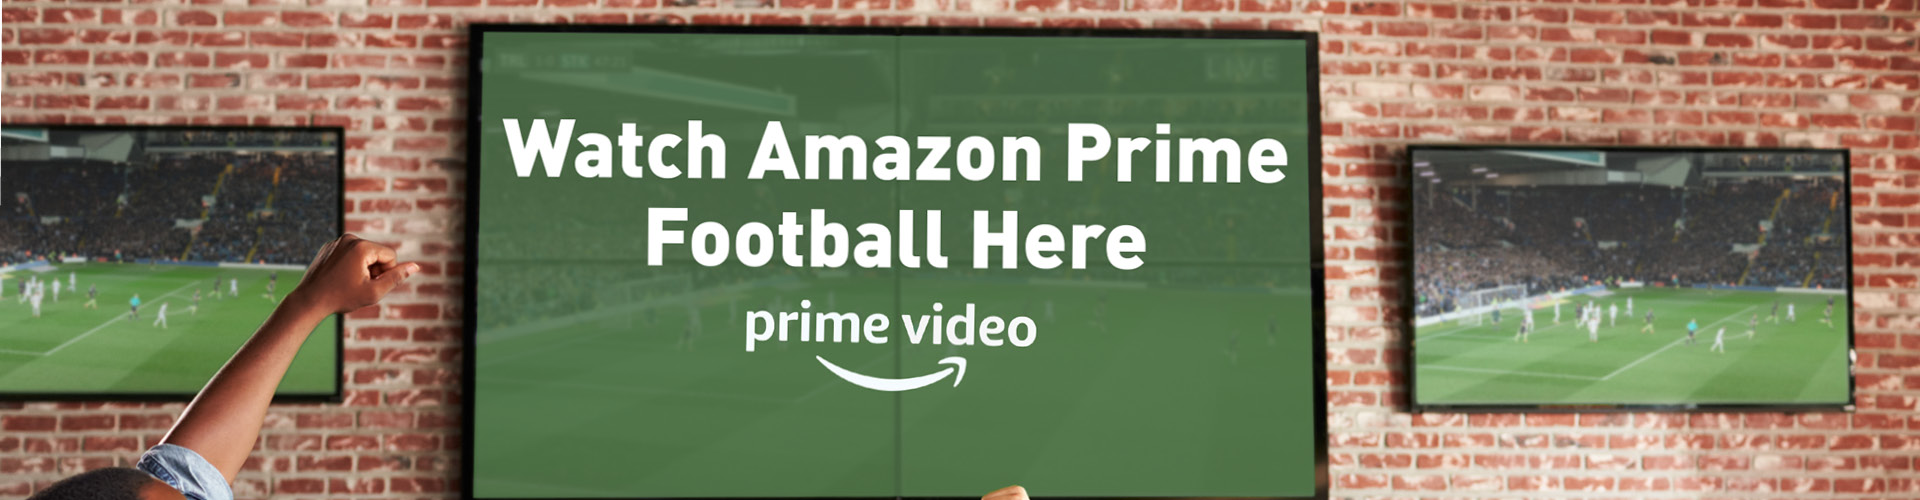 Watch Amazon Prime football at Lamb & Lion in Bath